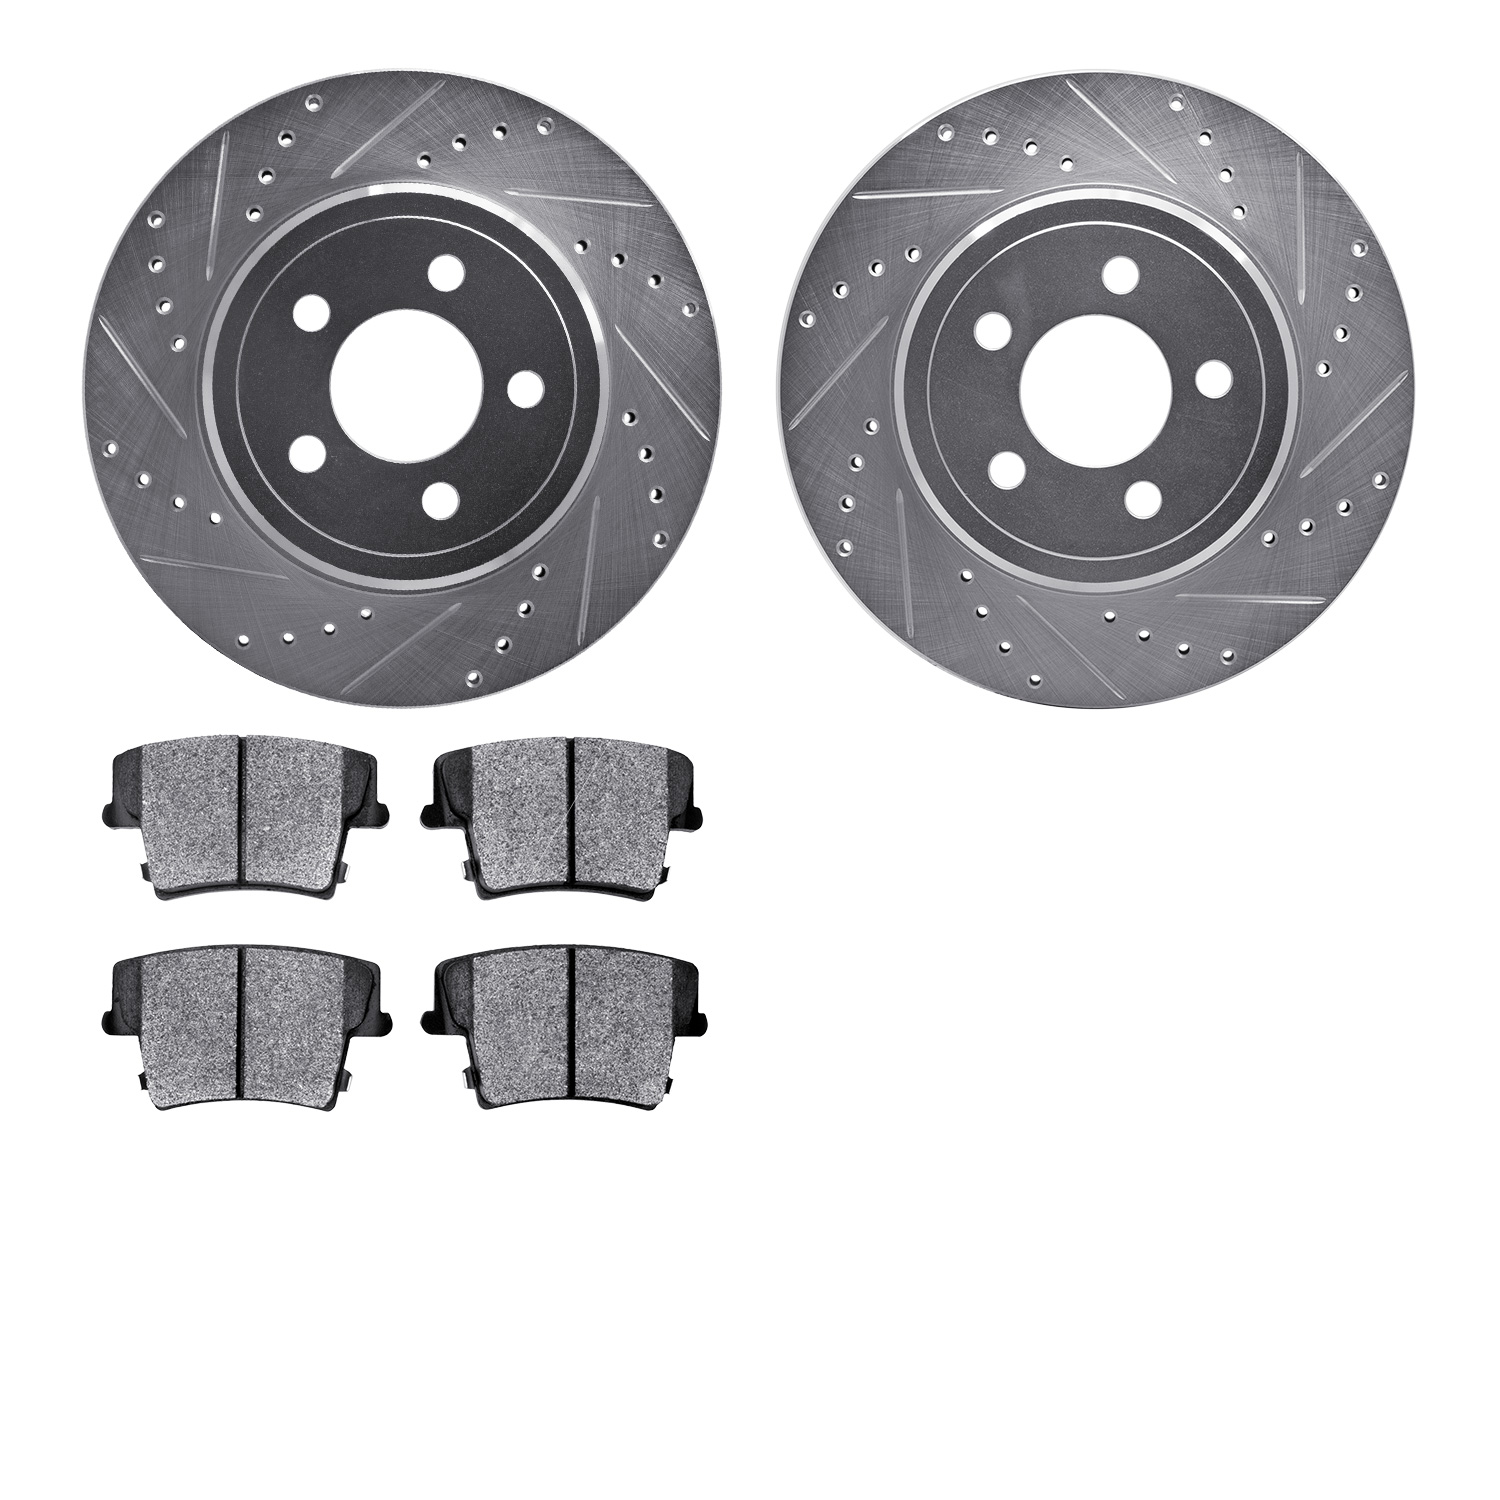 7202-39027 Drilled/Slotted Rotors w/Heavy-Duty Brake Pads Kit [Silver], Fits Select Mopar, Position: Rear